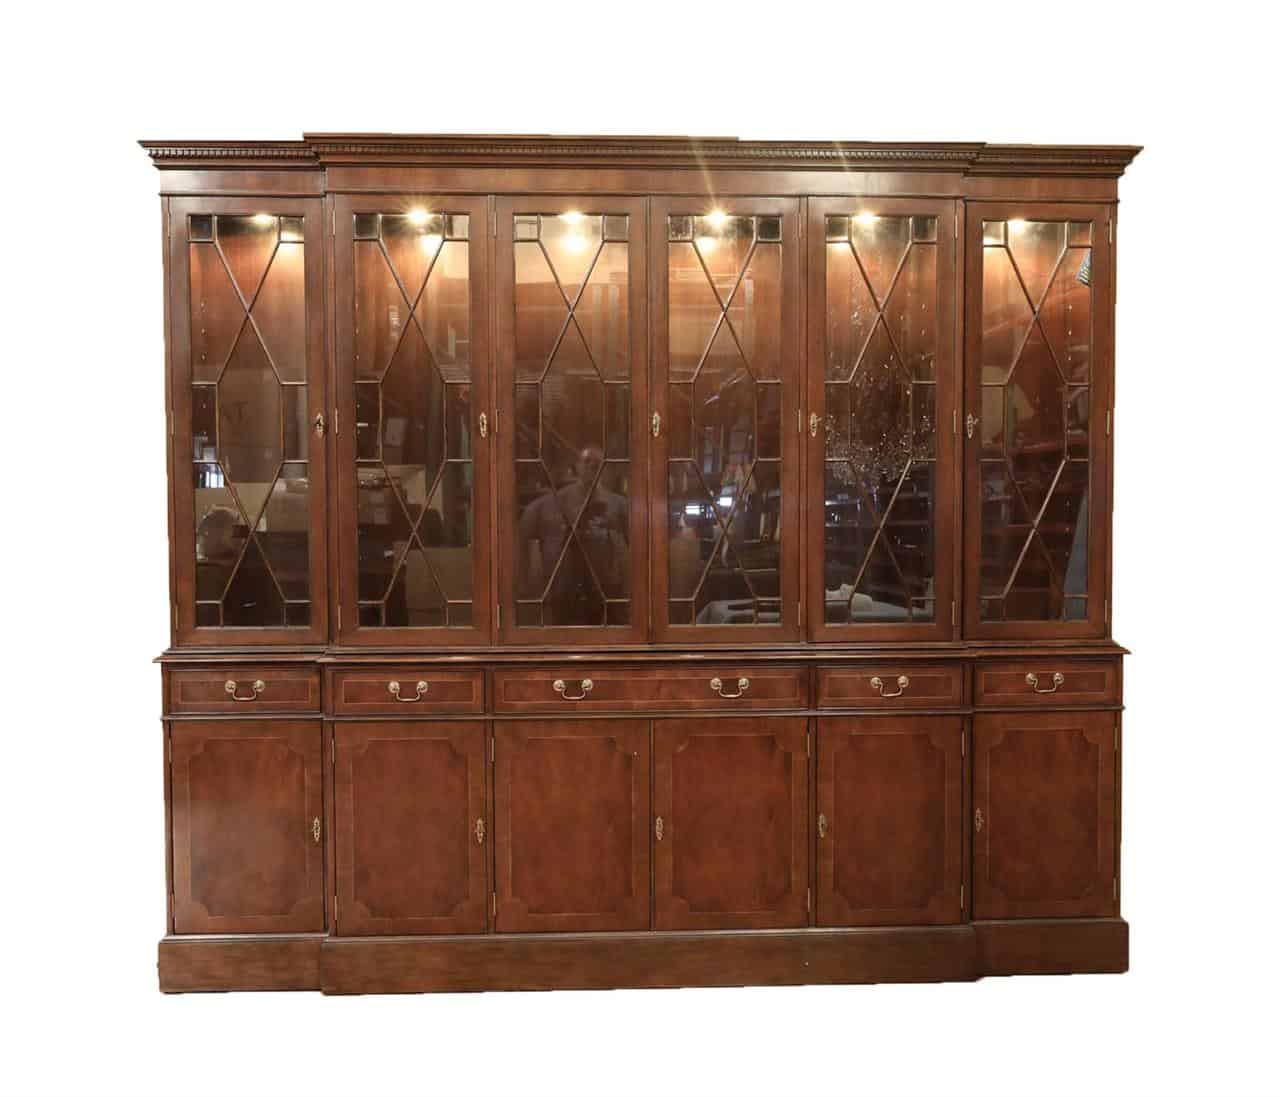 How Much is My Antique China Cabinet Worth